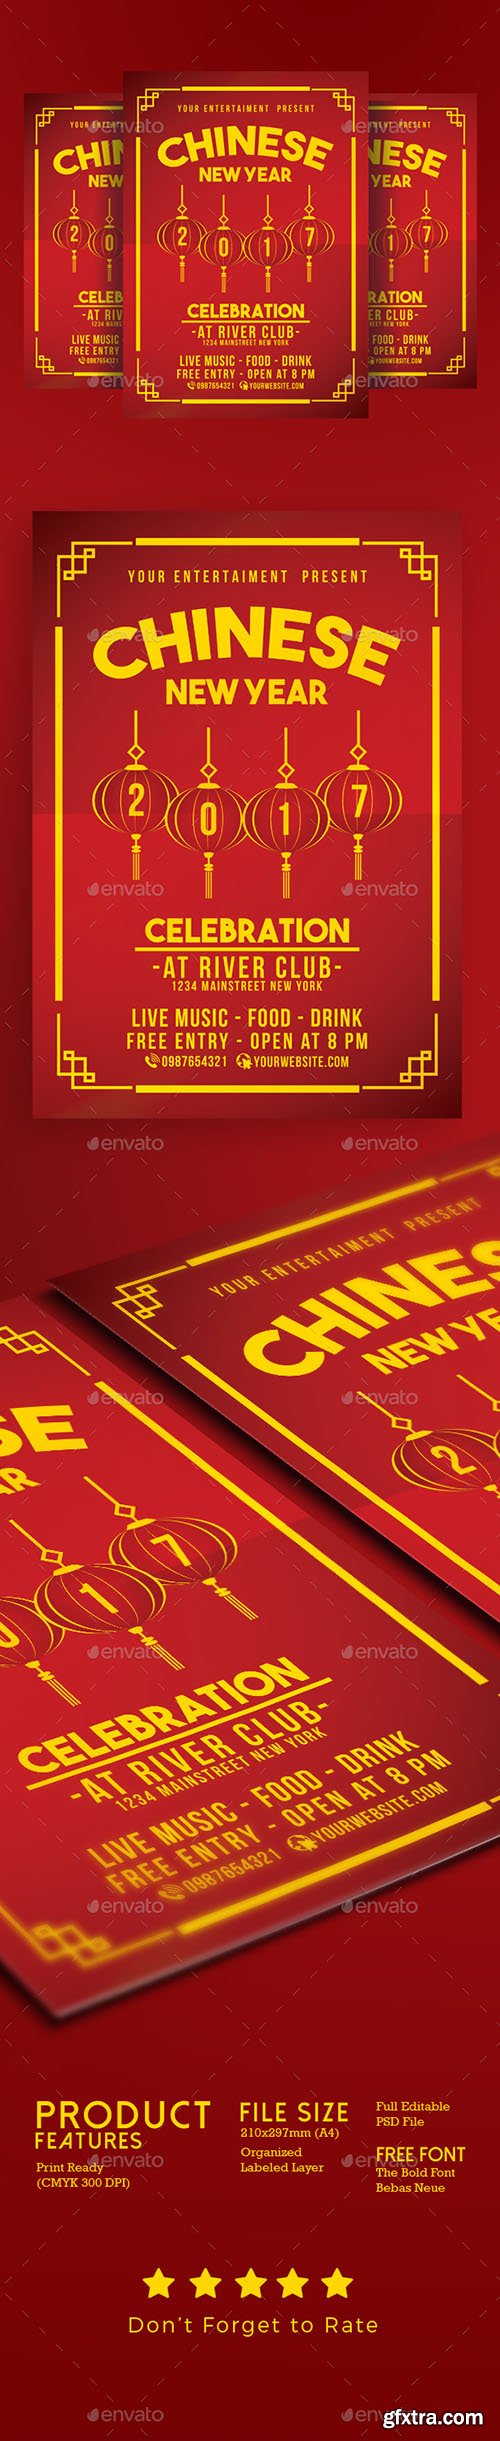 Graphicriver Chinese New Year Celebration 19268186